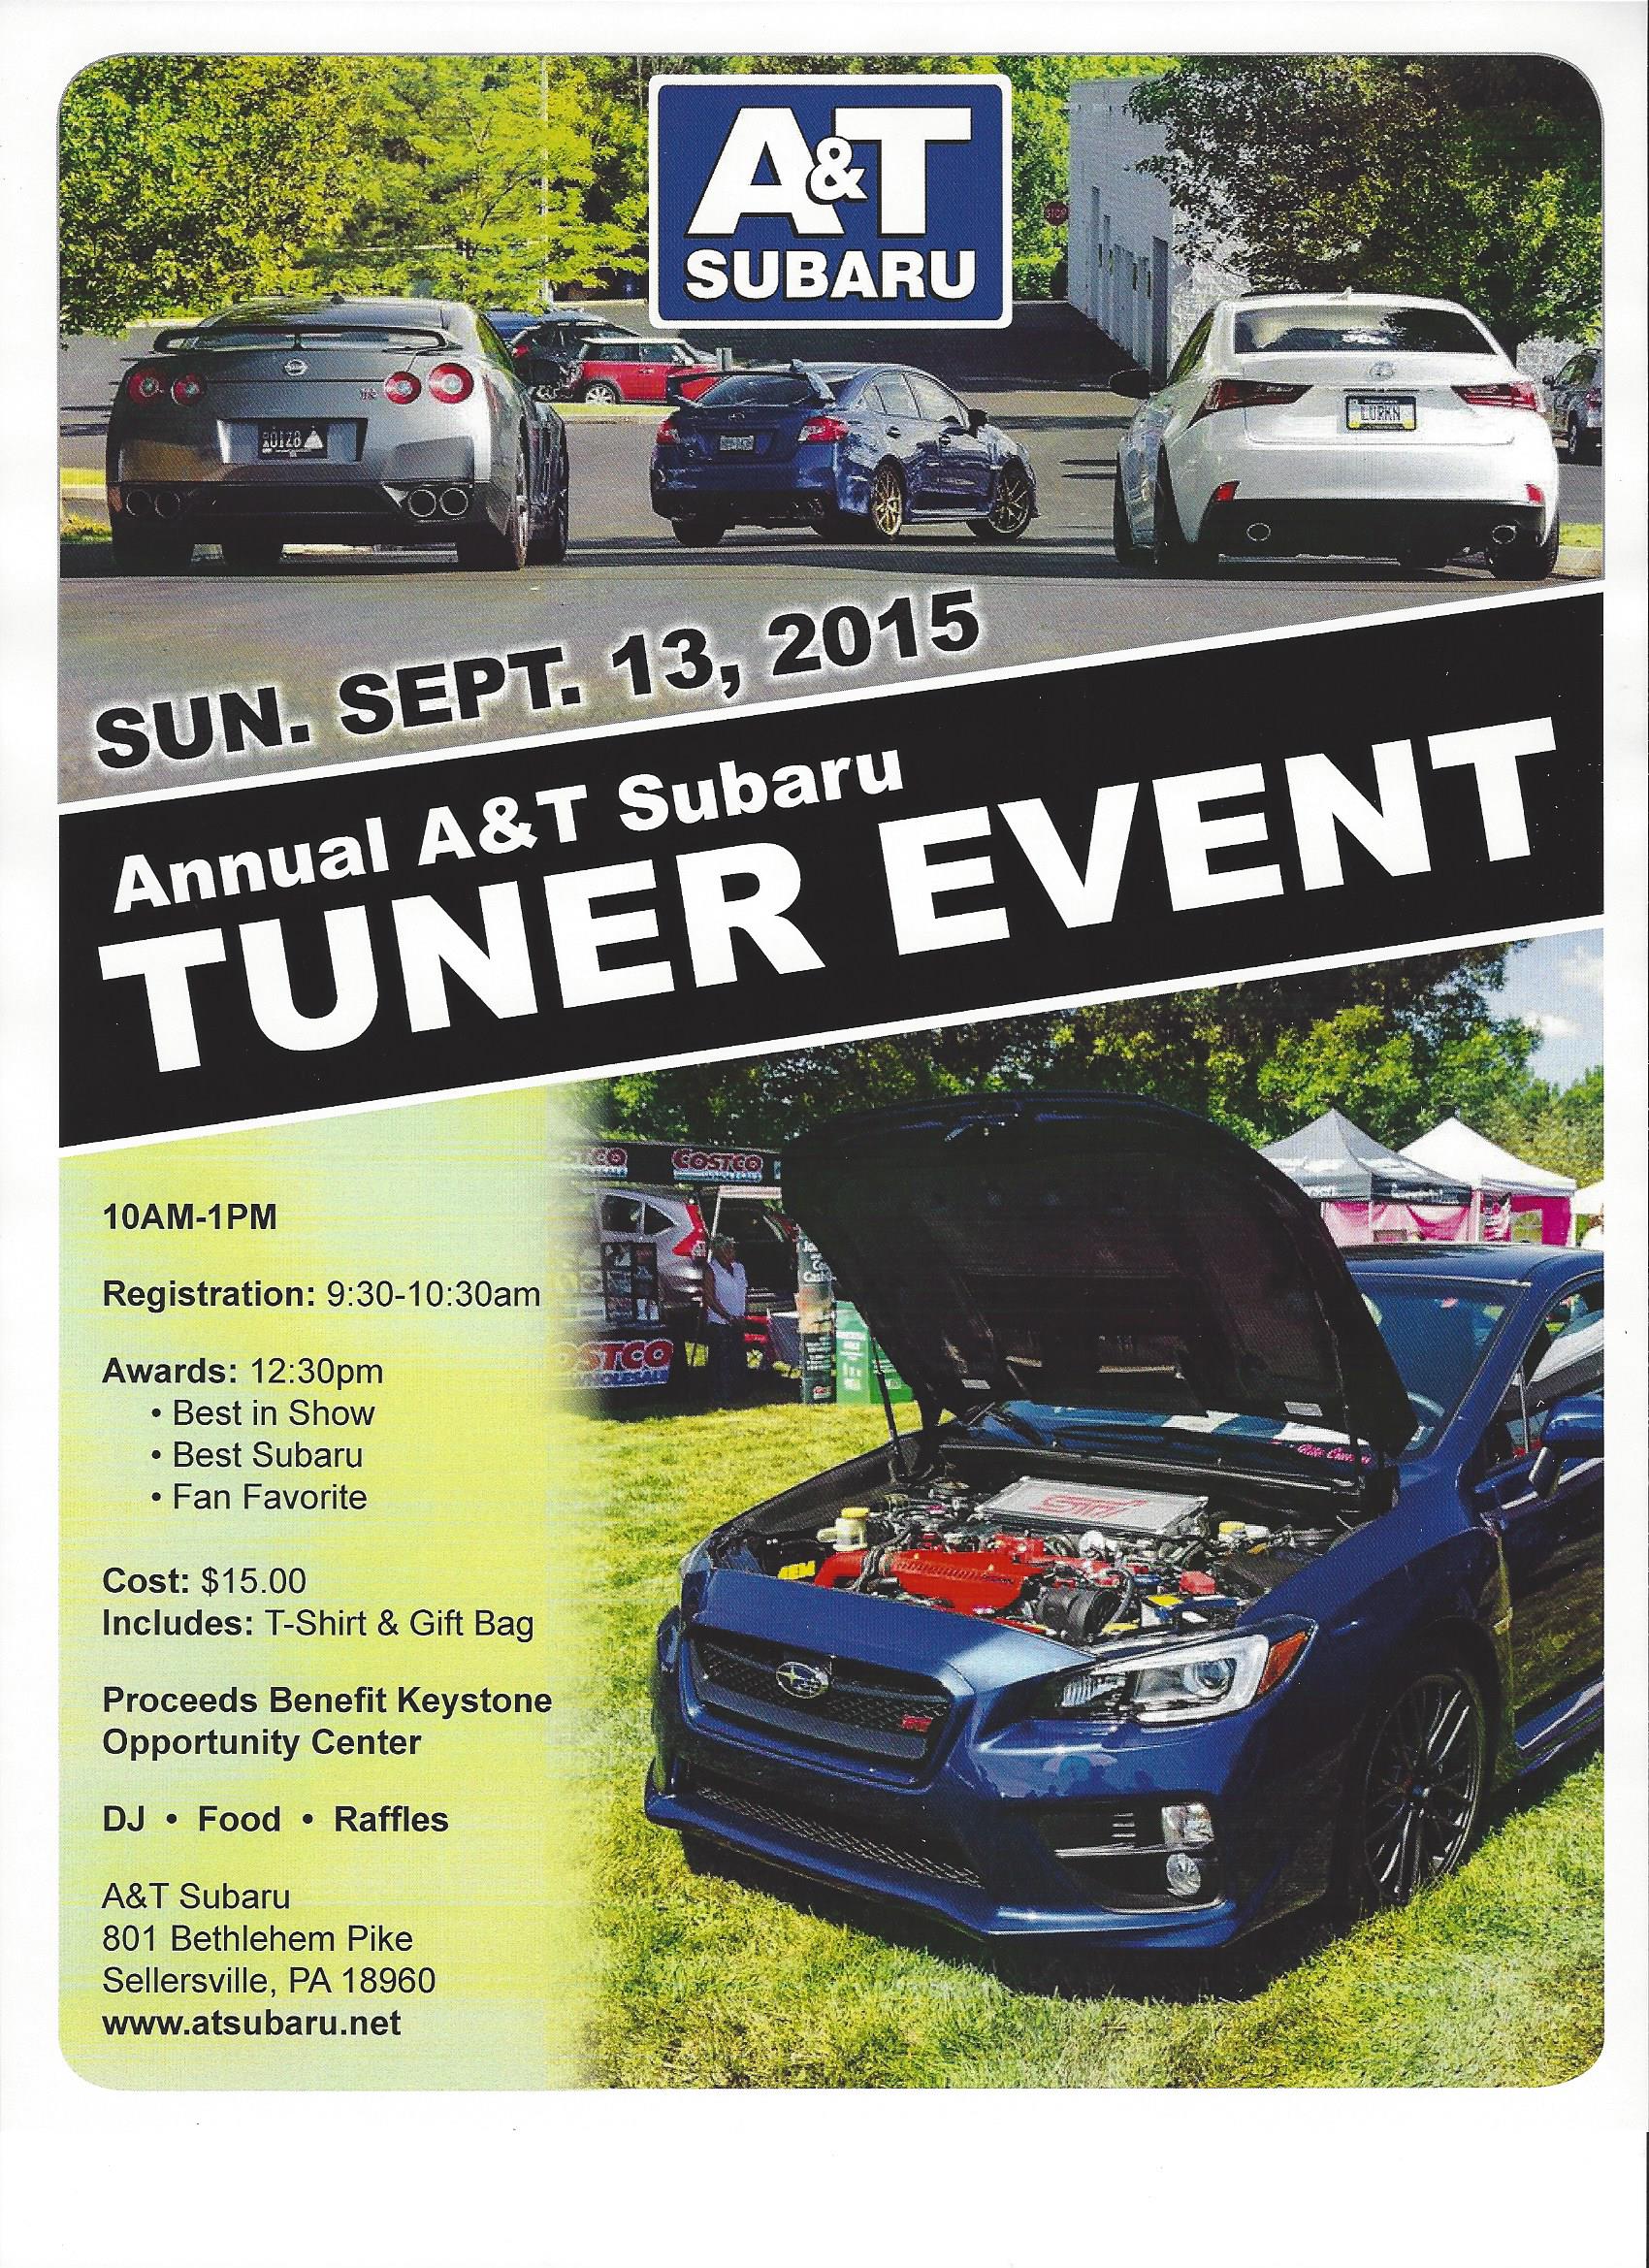 Annual A&T Celebration of Cars Event